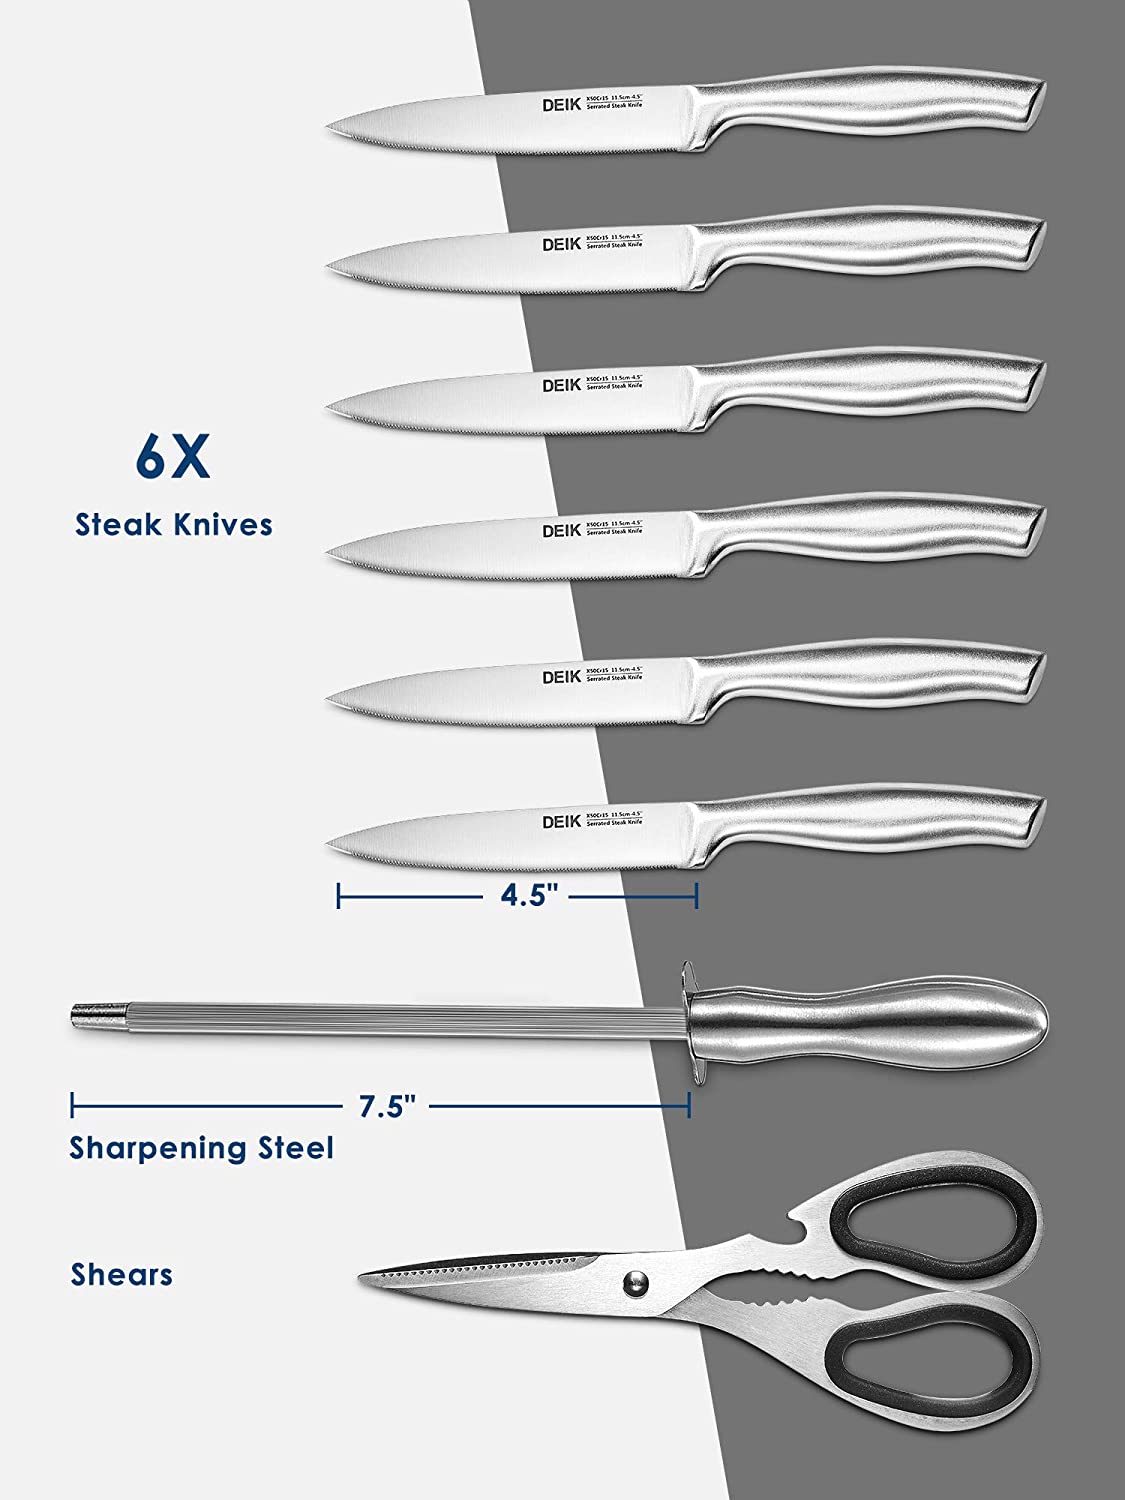 Deik Knife Set High Carbon Stainless Steel Kitchen Knife Set 17 PCS, Super Sharp Cutlery Knife Set with Acrylic Stand, Scissors and Serrated Steak Knives